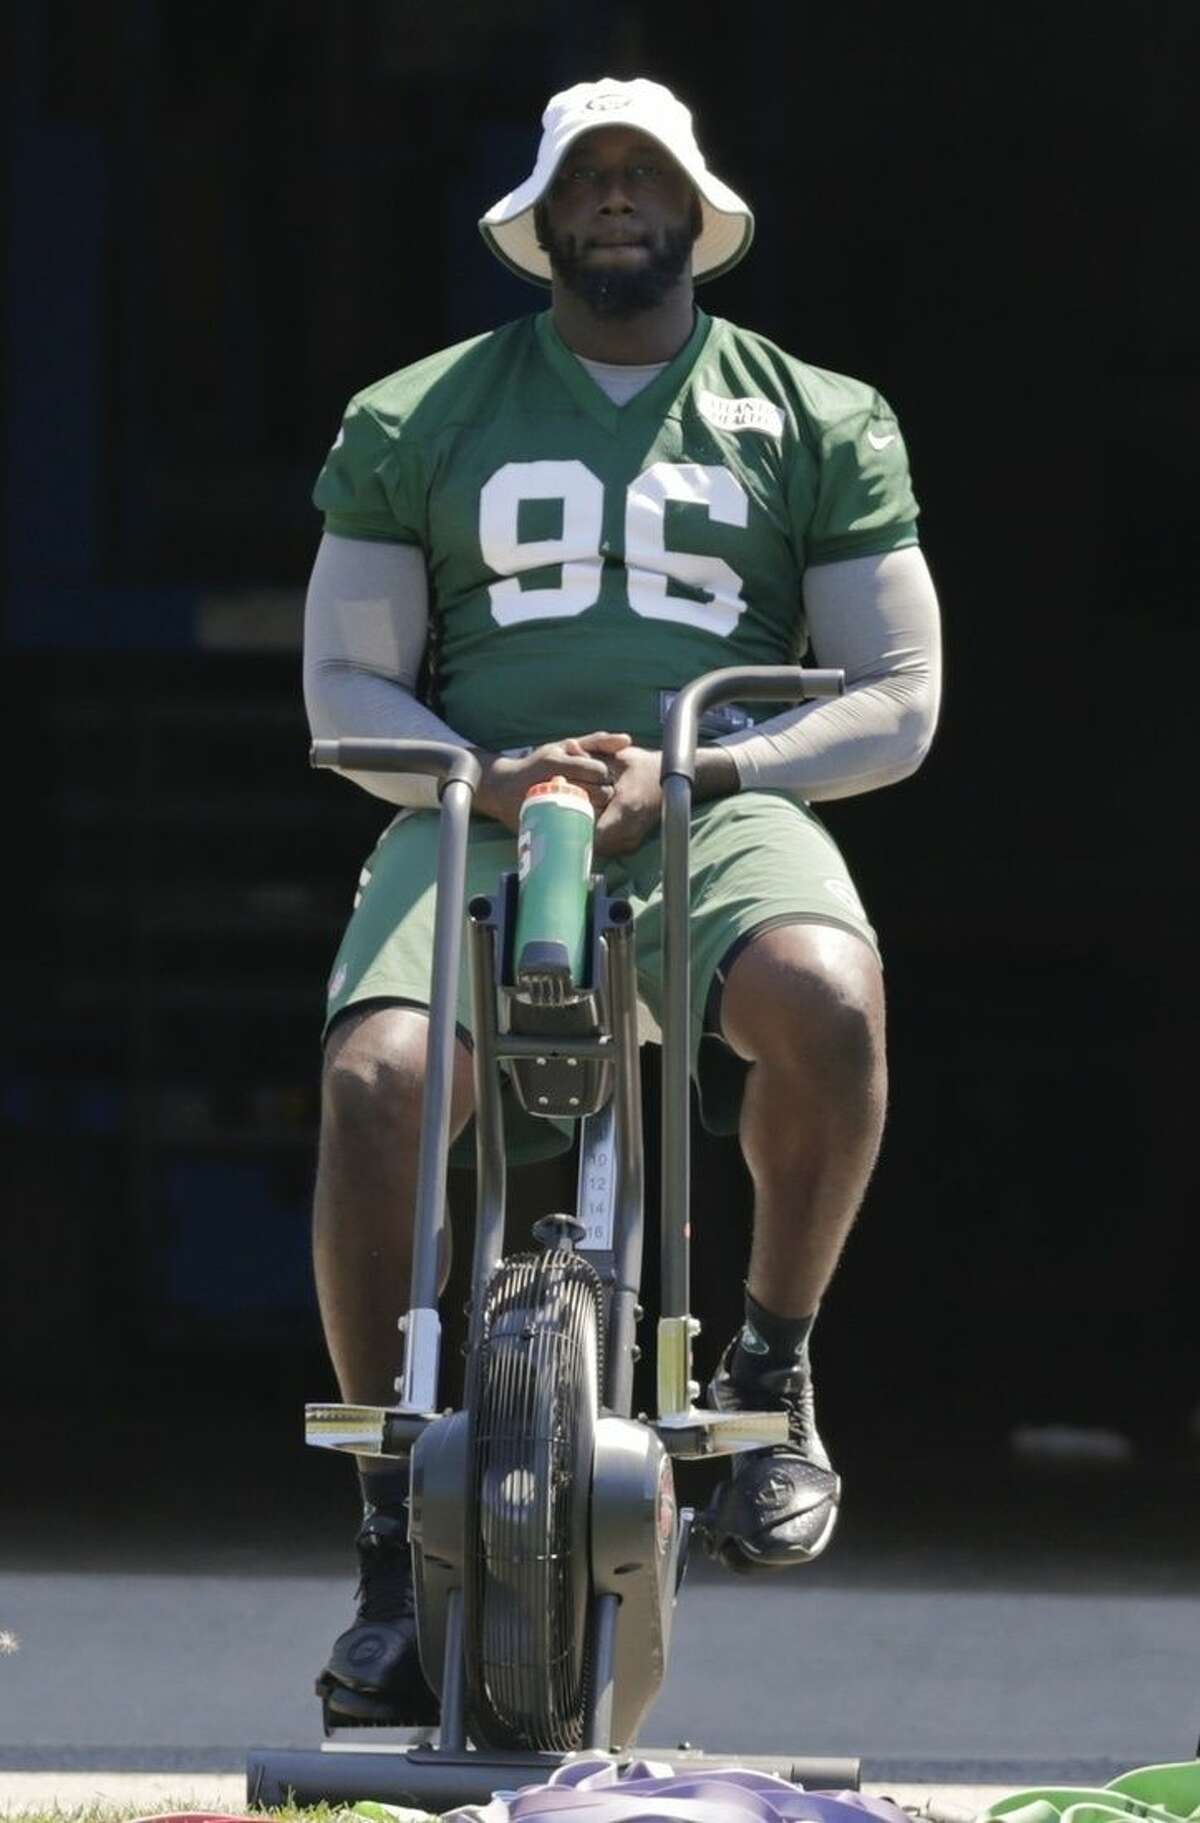 New York Jets' Muhammad Wilkerson rides a stationary bike during practice at NFL football training camp, Tuesday, Aug. 4, 2015, in Florham Park, N.J. (AP Photo/Frank Franklin II)